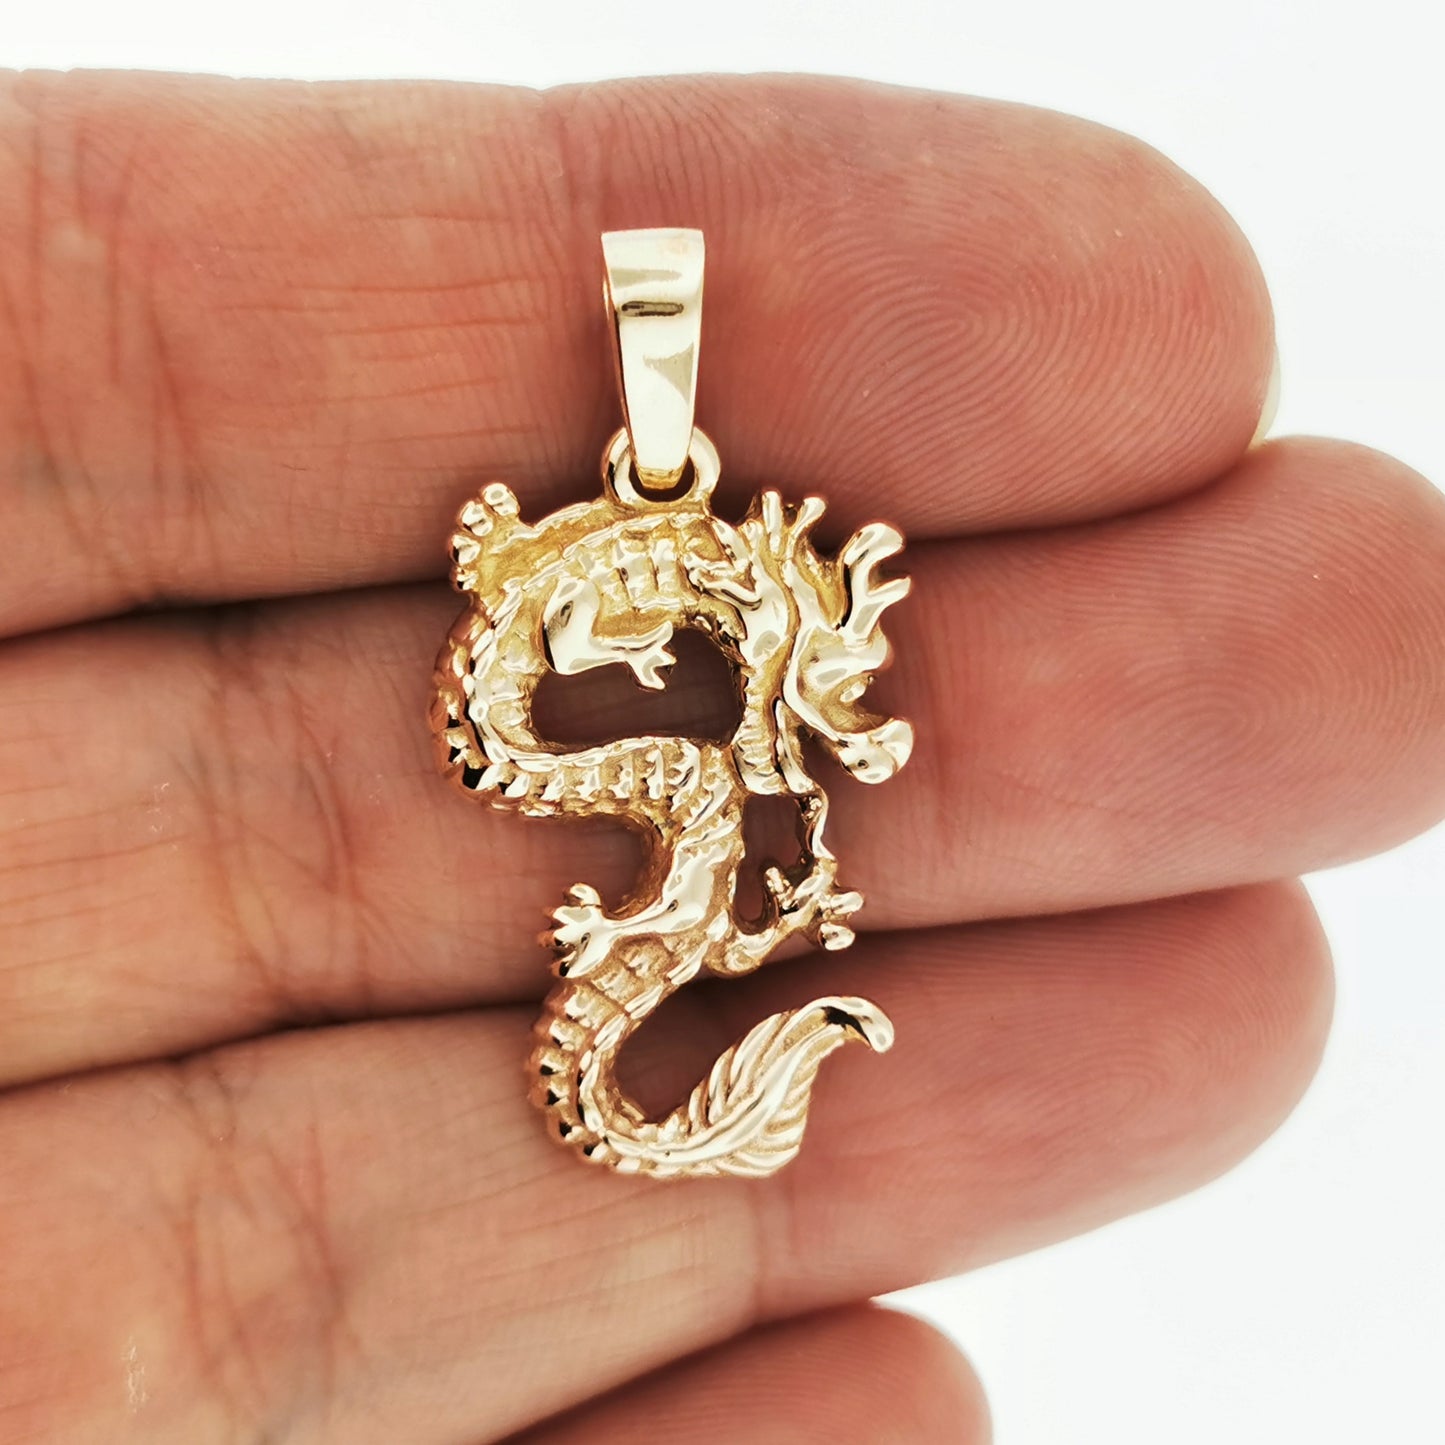 Asian Dragon Pendant In Sterling Silver or Antique Bronze, Year Of The Dragon Pendant, Year Of The Dragon Gift, Silver Dragon Pendant, Bronze Dragon Pendant, Asian Dragon Pendant, Chinese Dragon Pendant, Chinese Dragon Jewelry, Chinese Dragon Jewellery, Dragon Lover Jewelry, Dragon Lover Jewellery